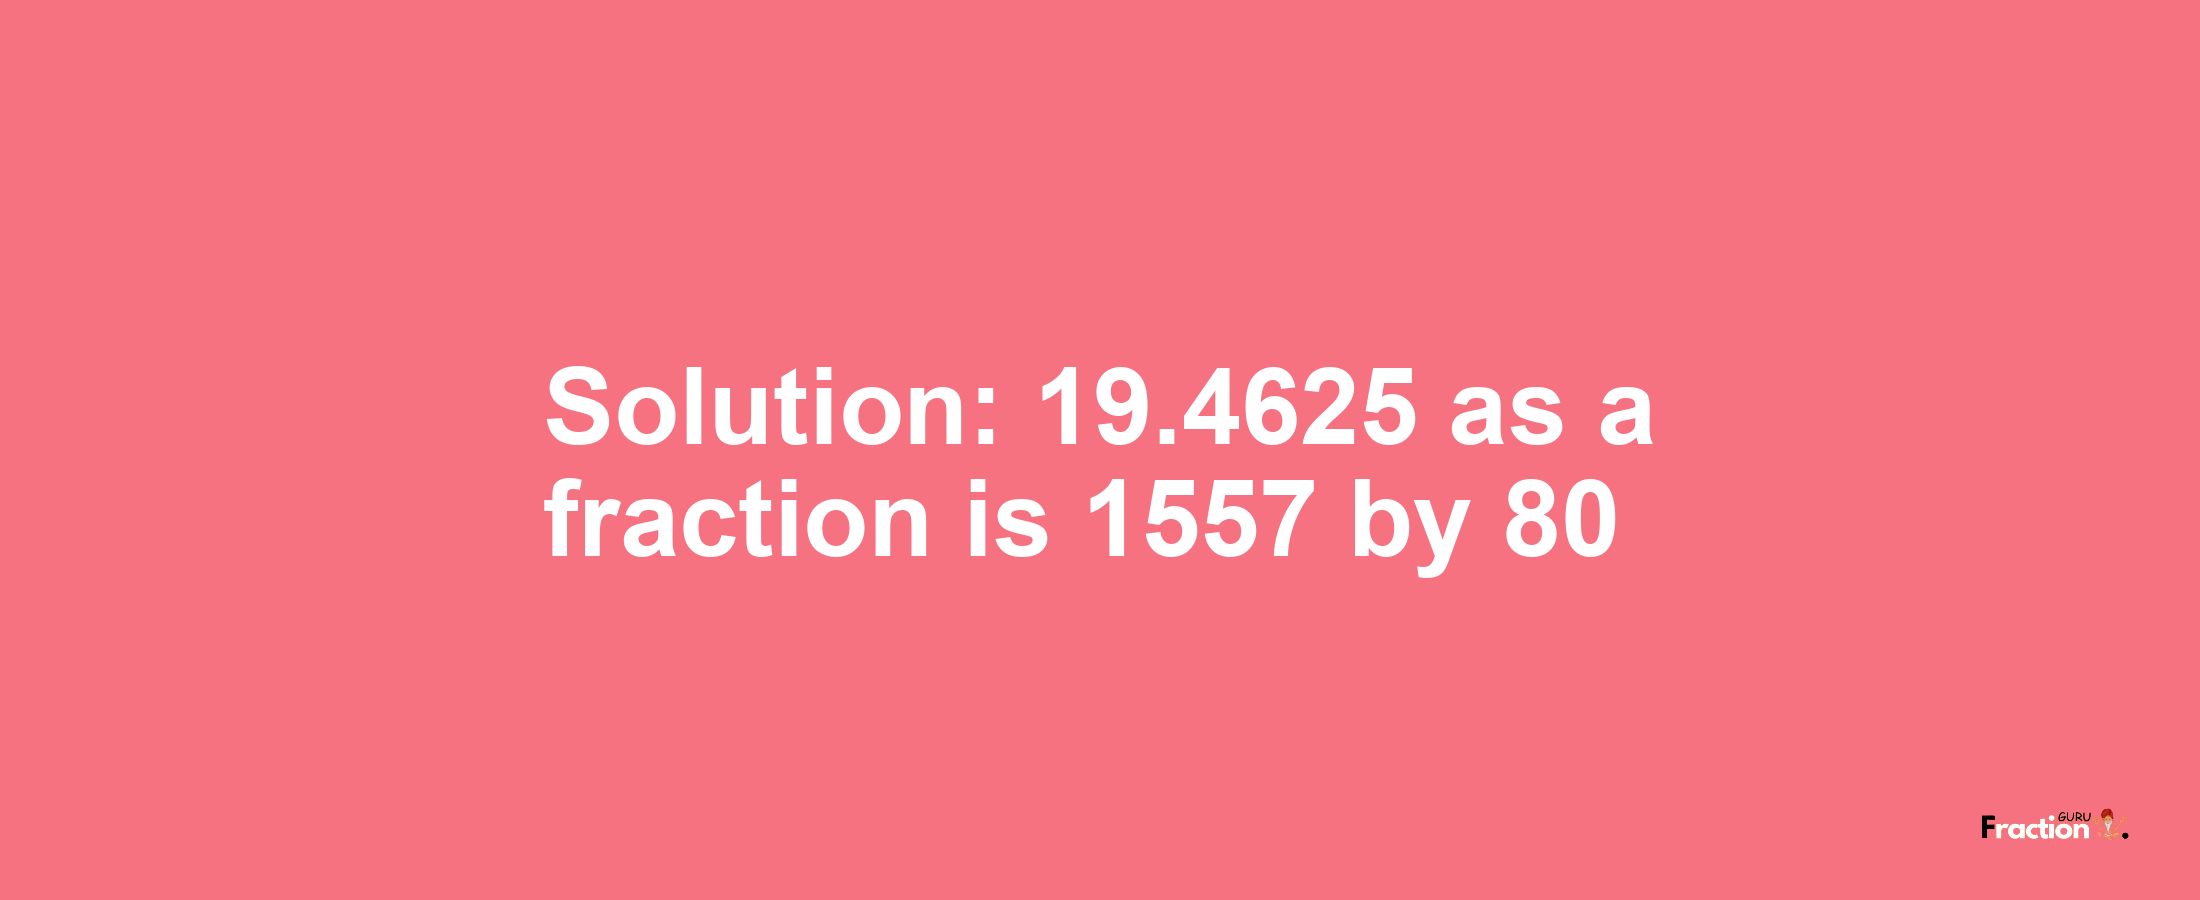 Solution:19.4625 as a fraction is 1557/80